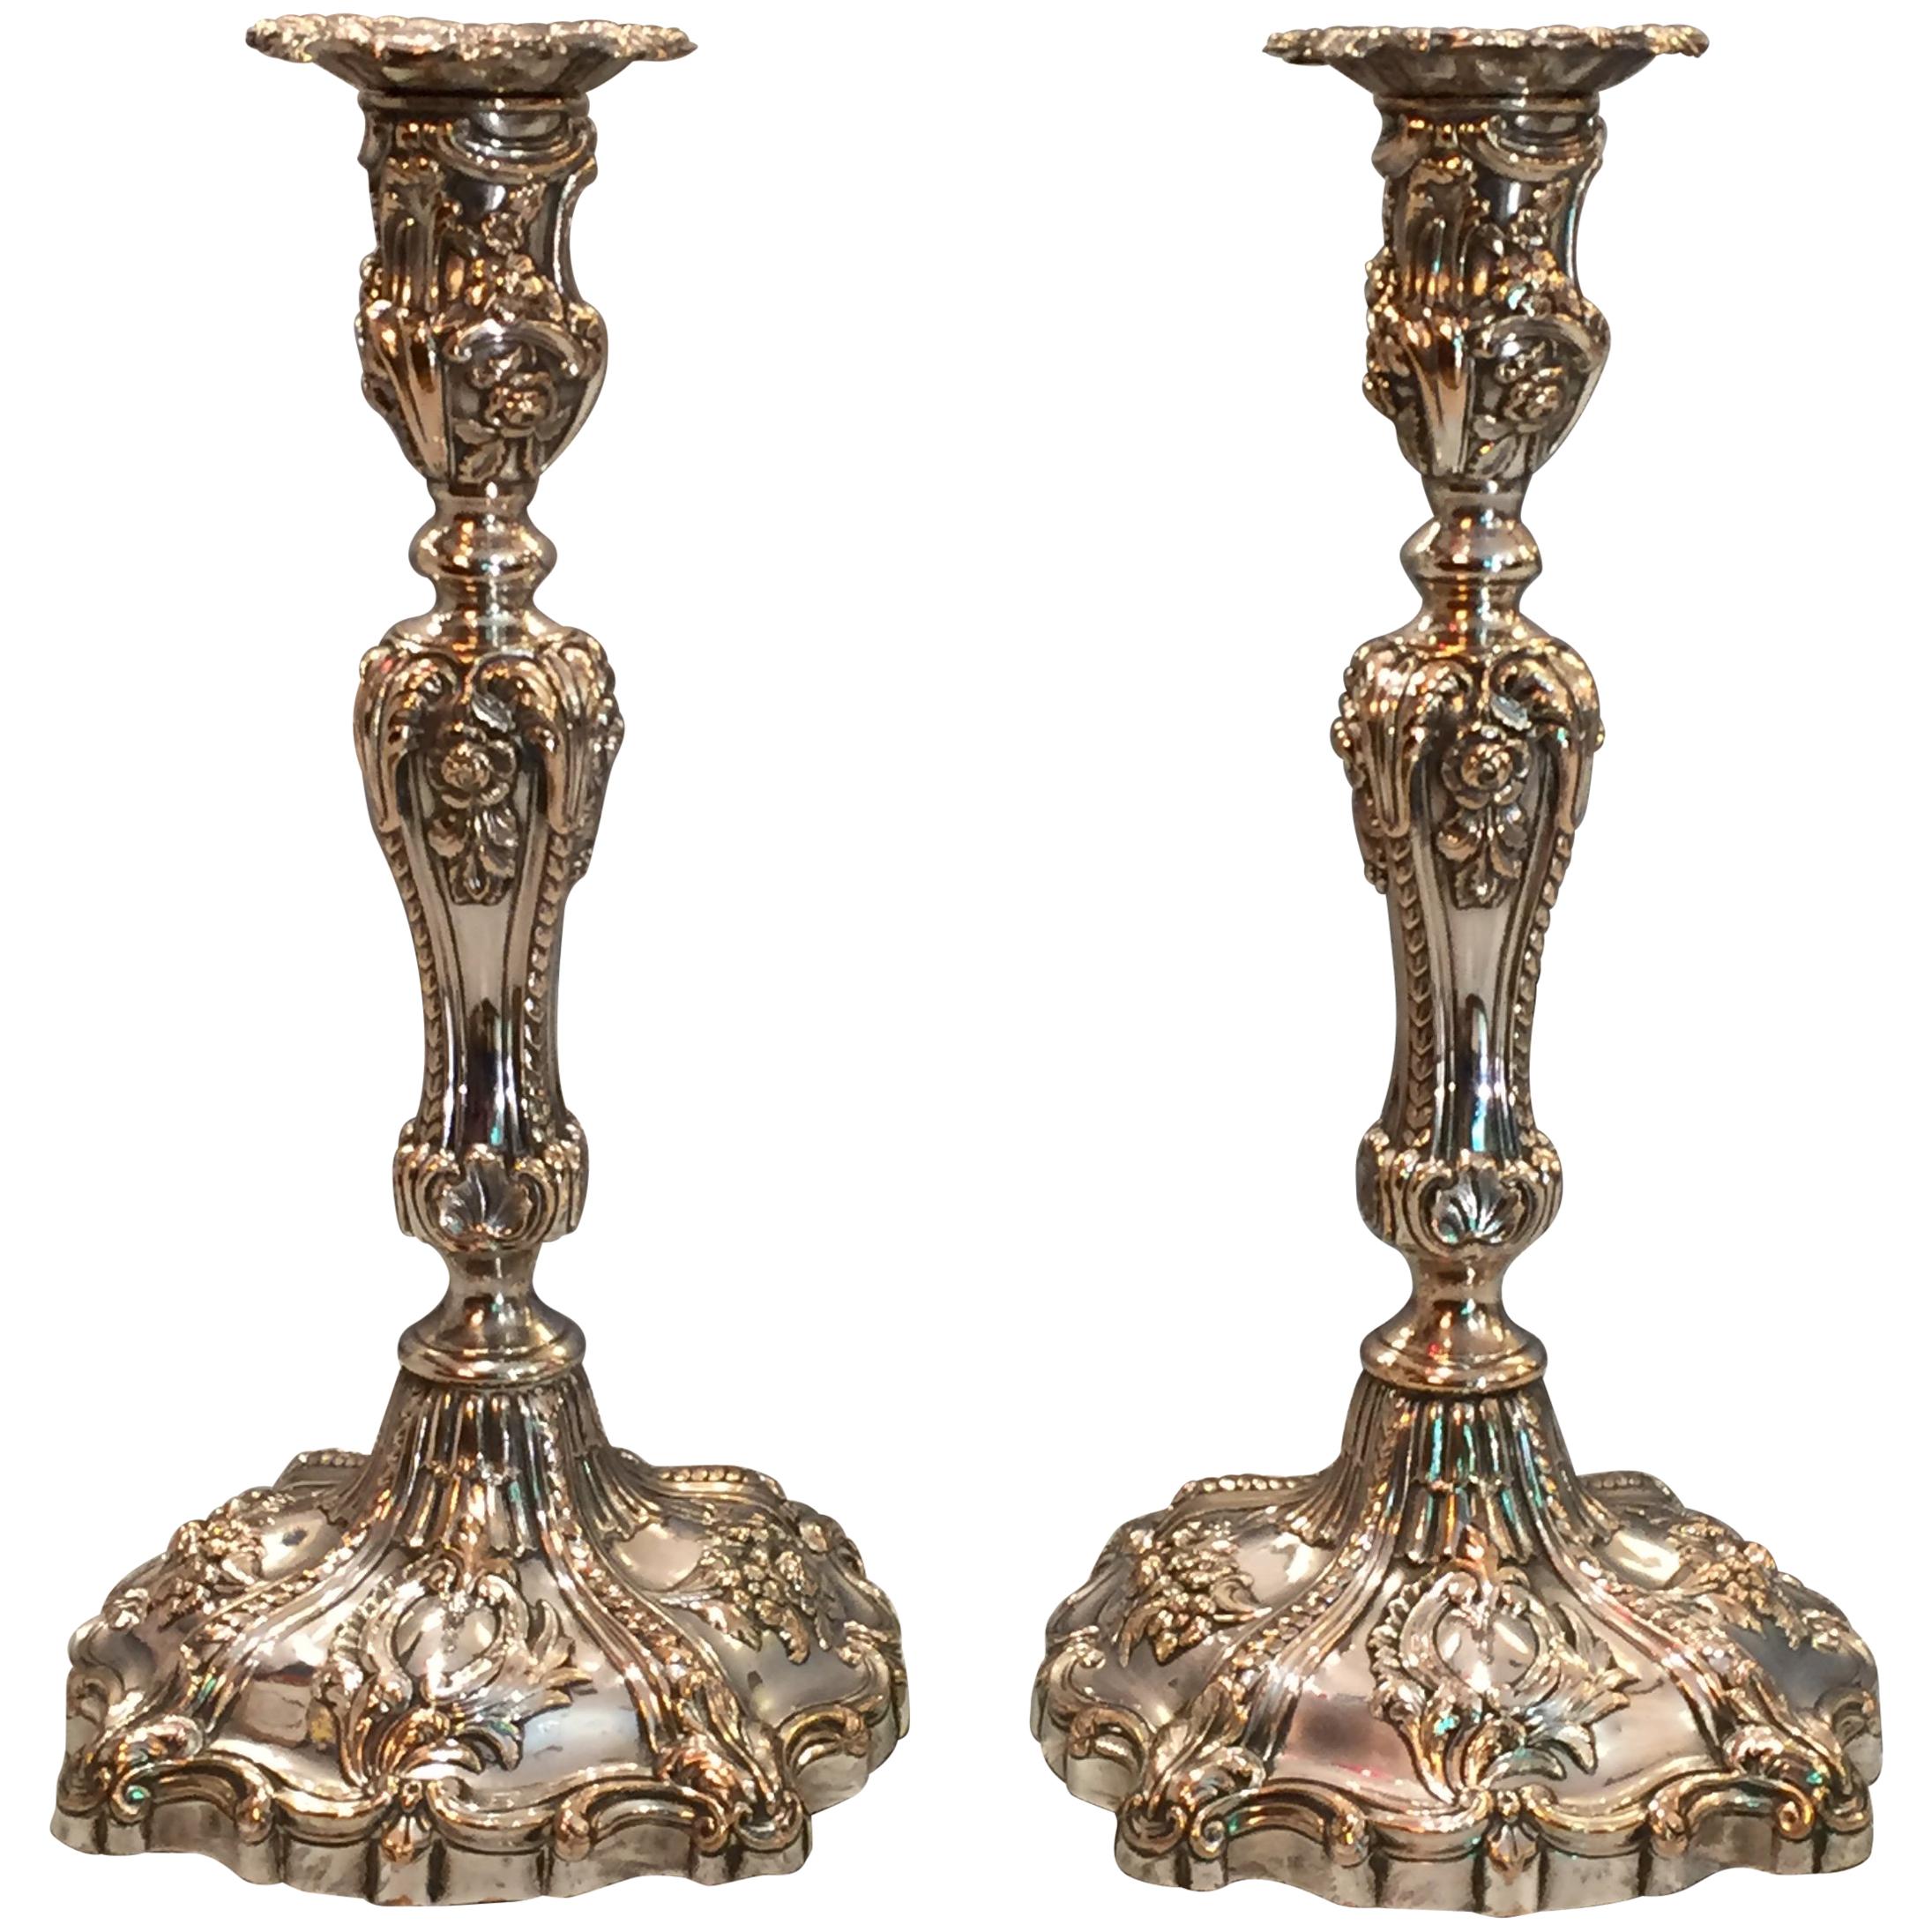 Regency Period Rococo Revival Sheffield Plate Candlesticks by T and J Creswick For Sale